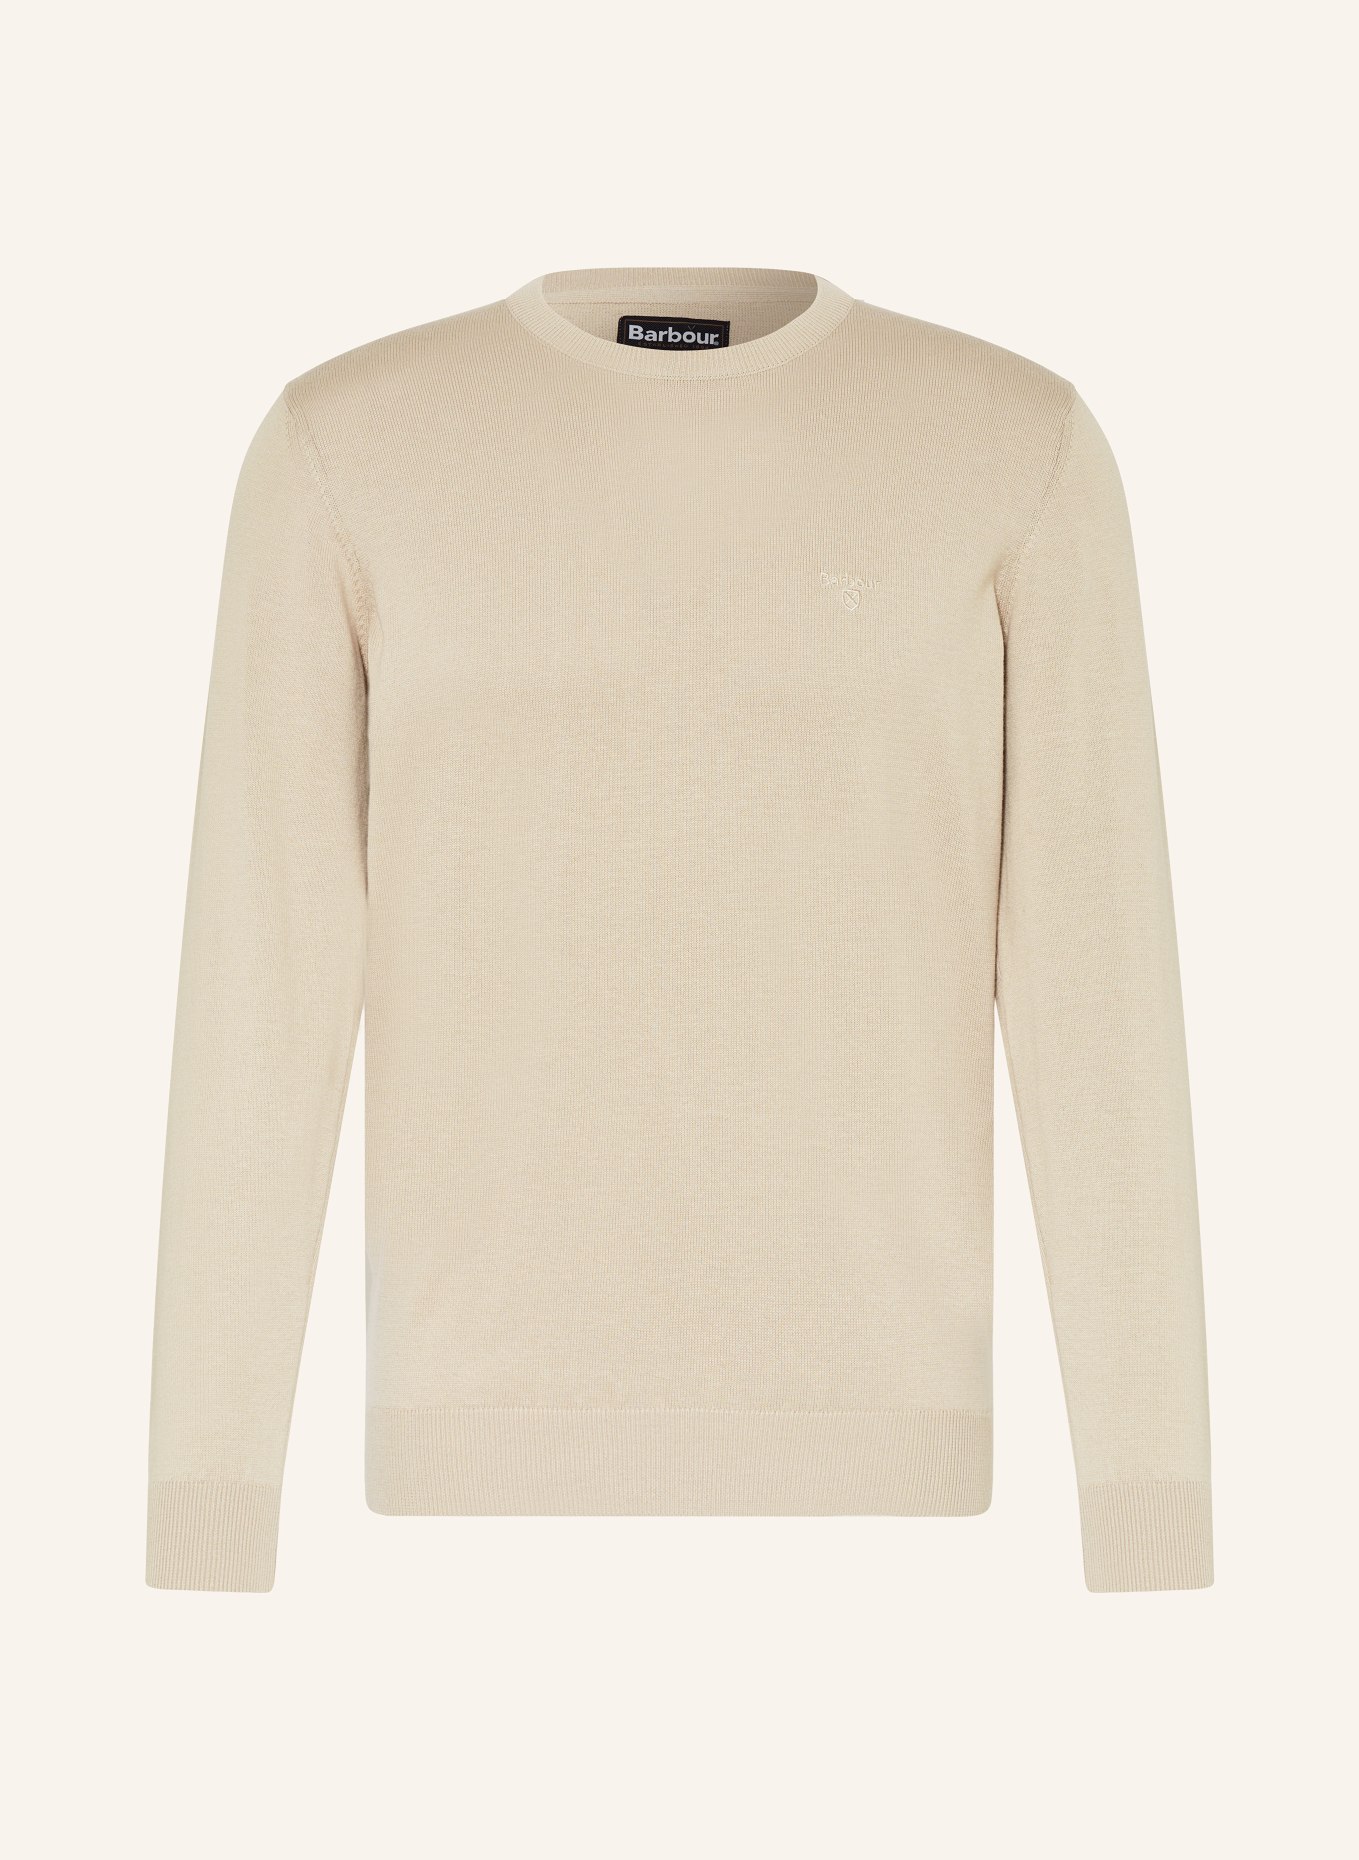 Barbour Sweater, Color: BEIGE (Image 1)